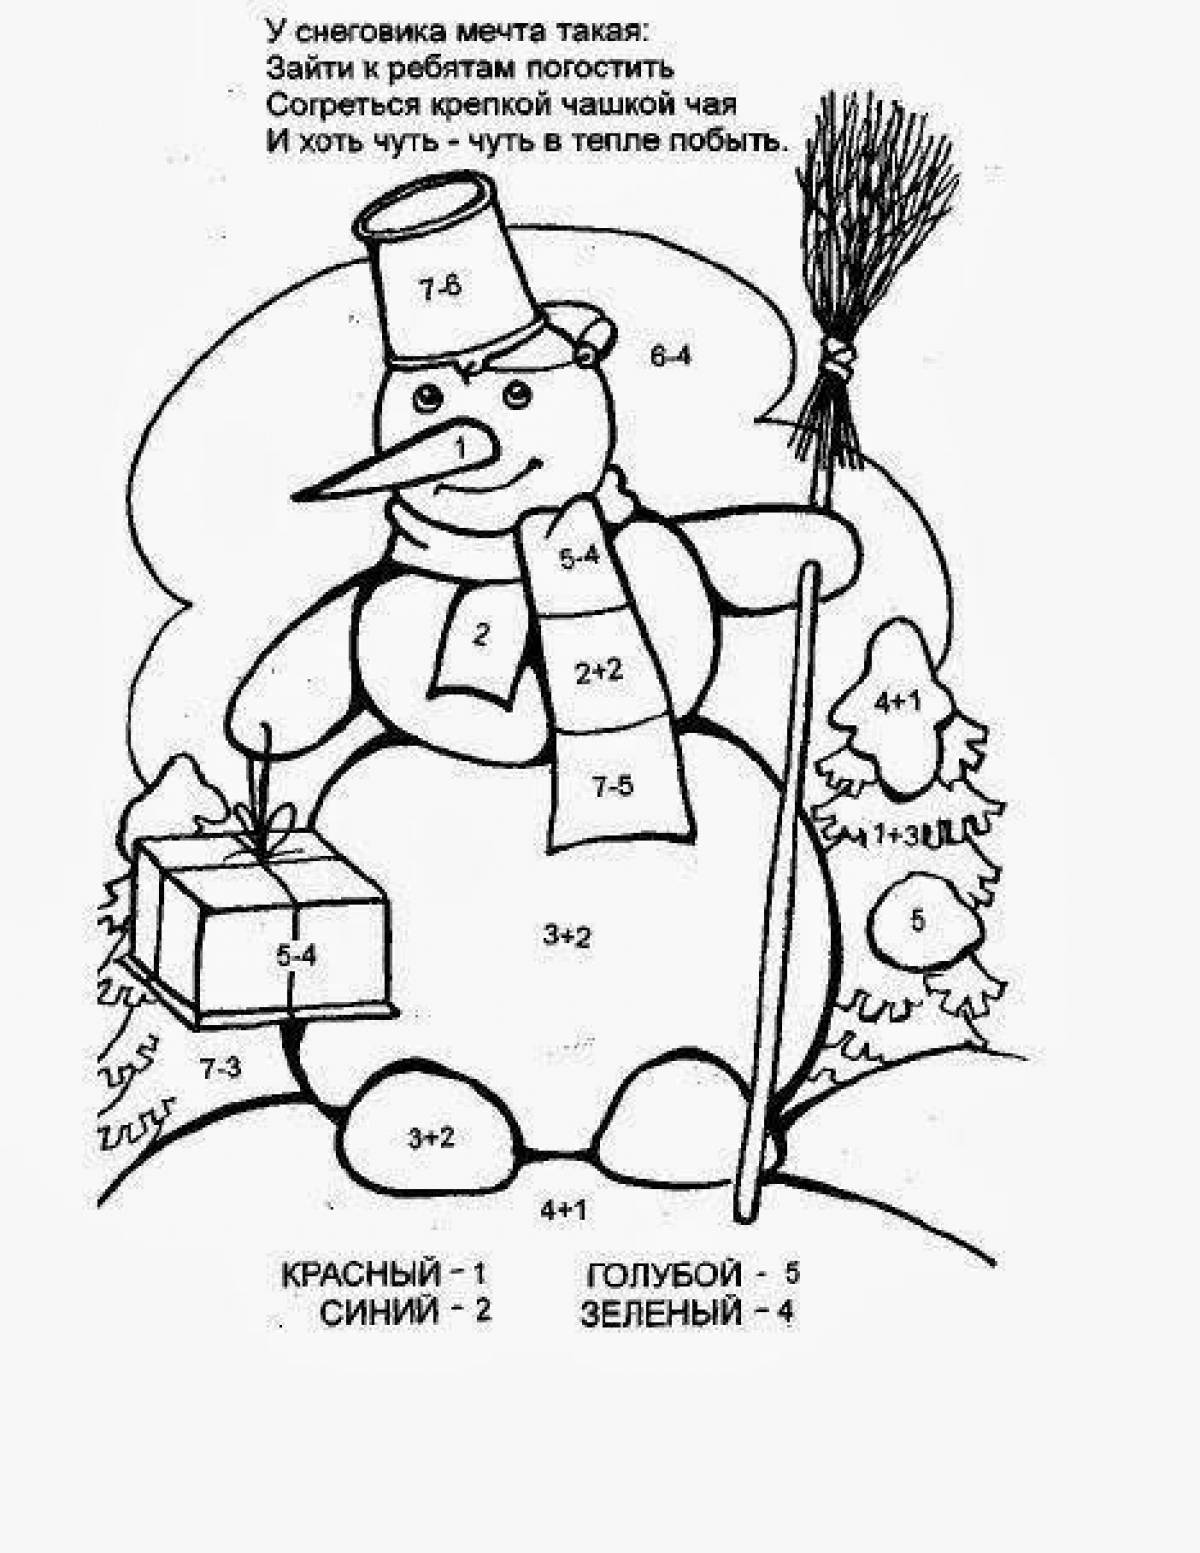 Exquisite 1st grade Christmas coloring book